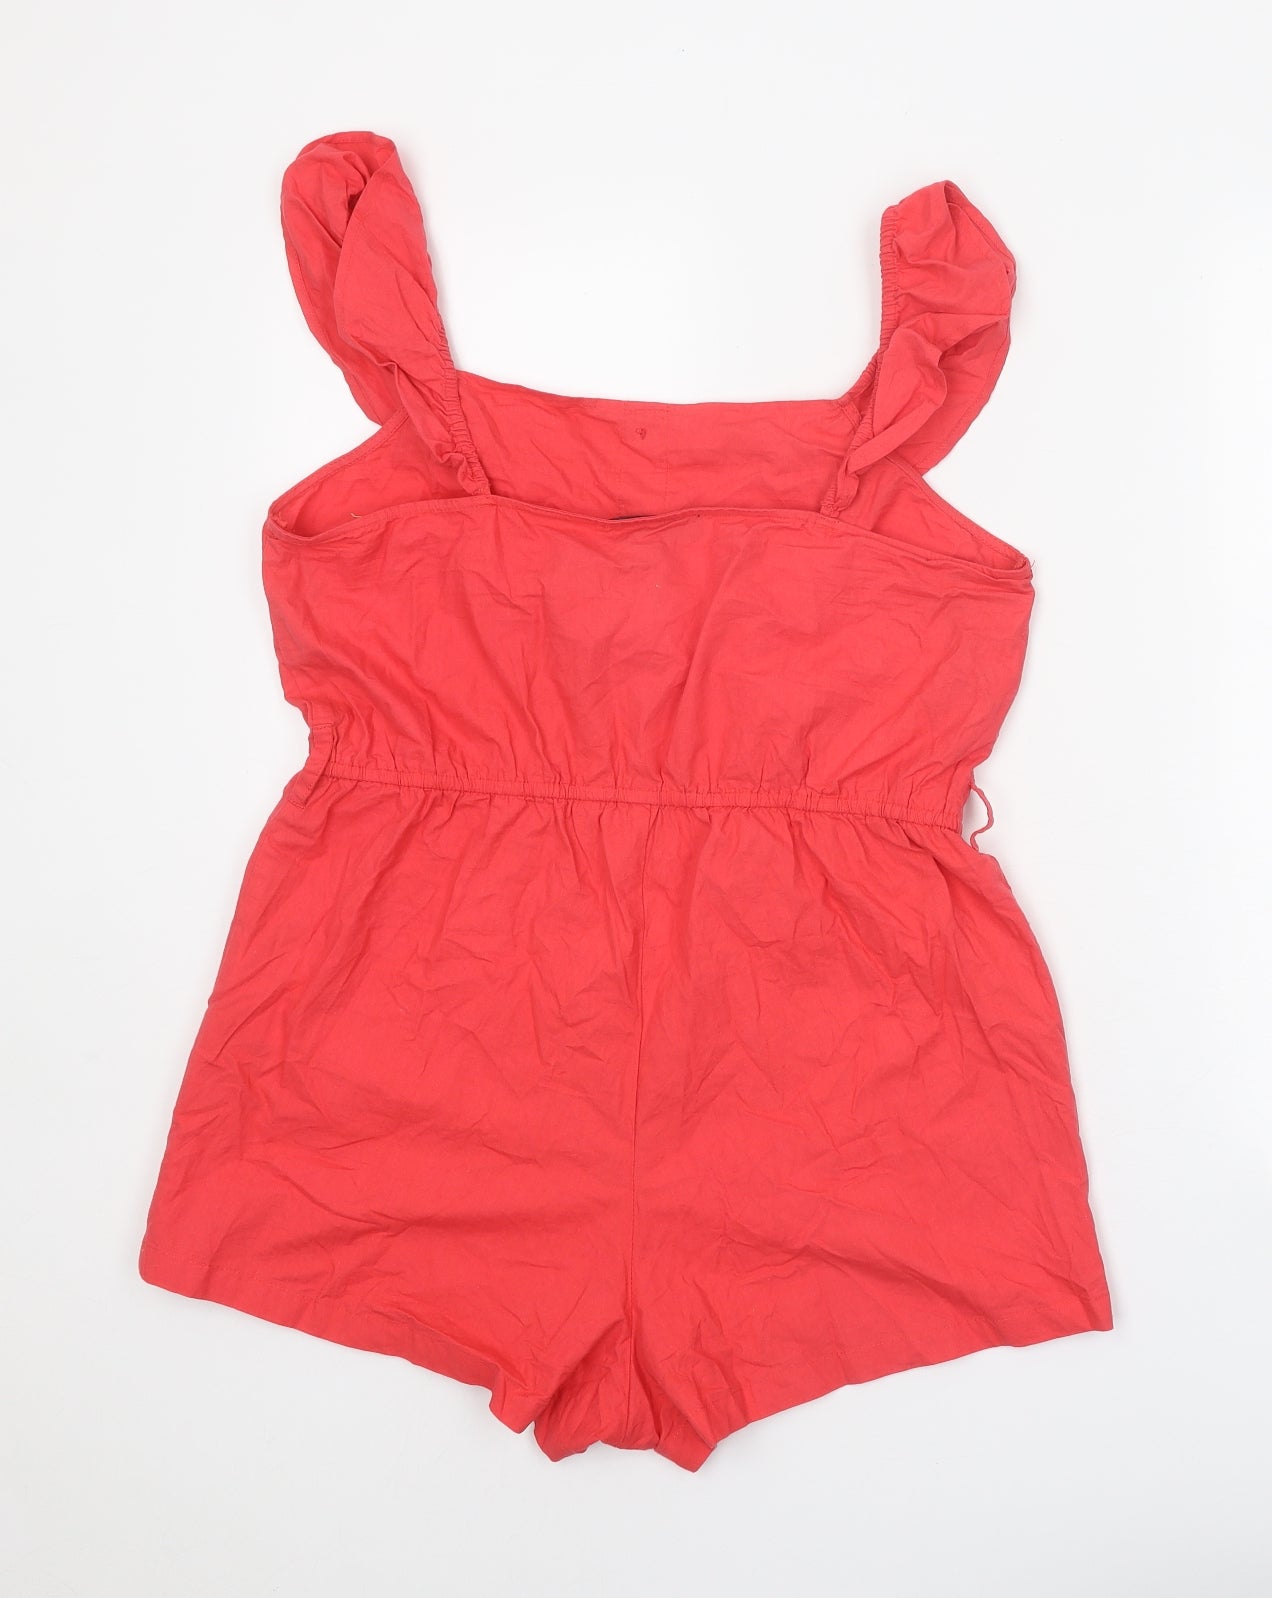 Missguided Womens Red Polyester Romper One-Piece Size 12 Button